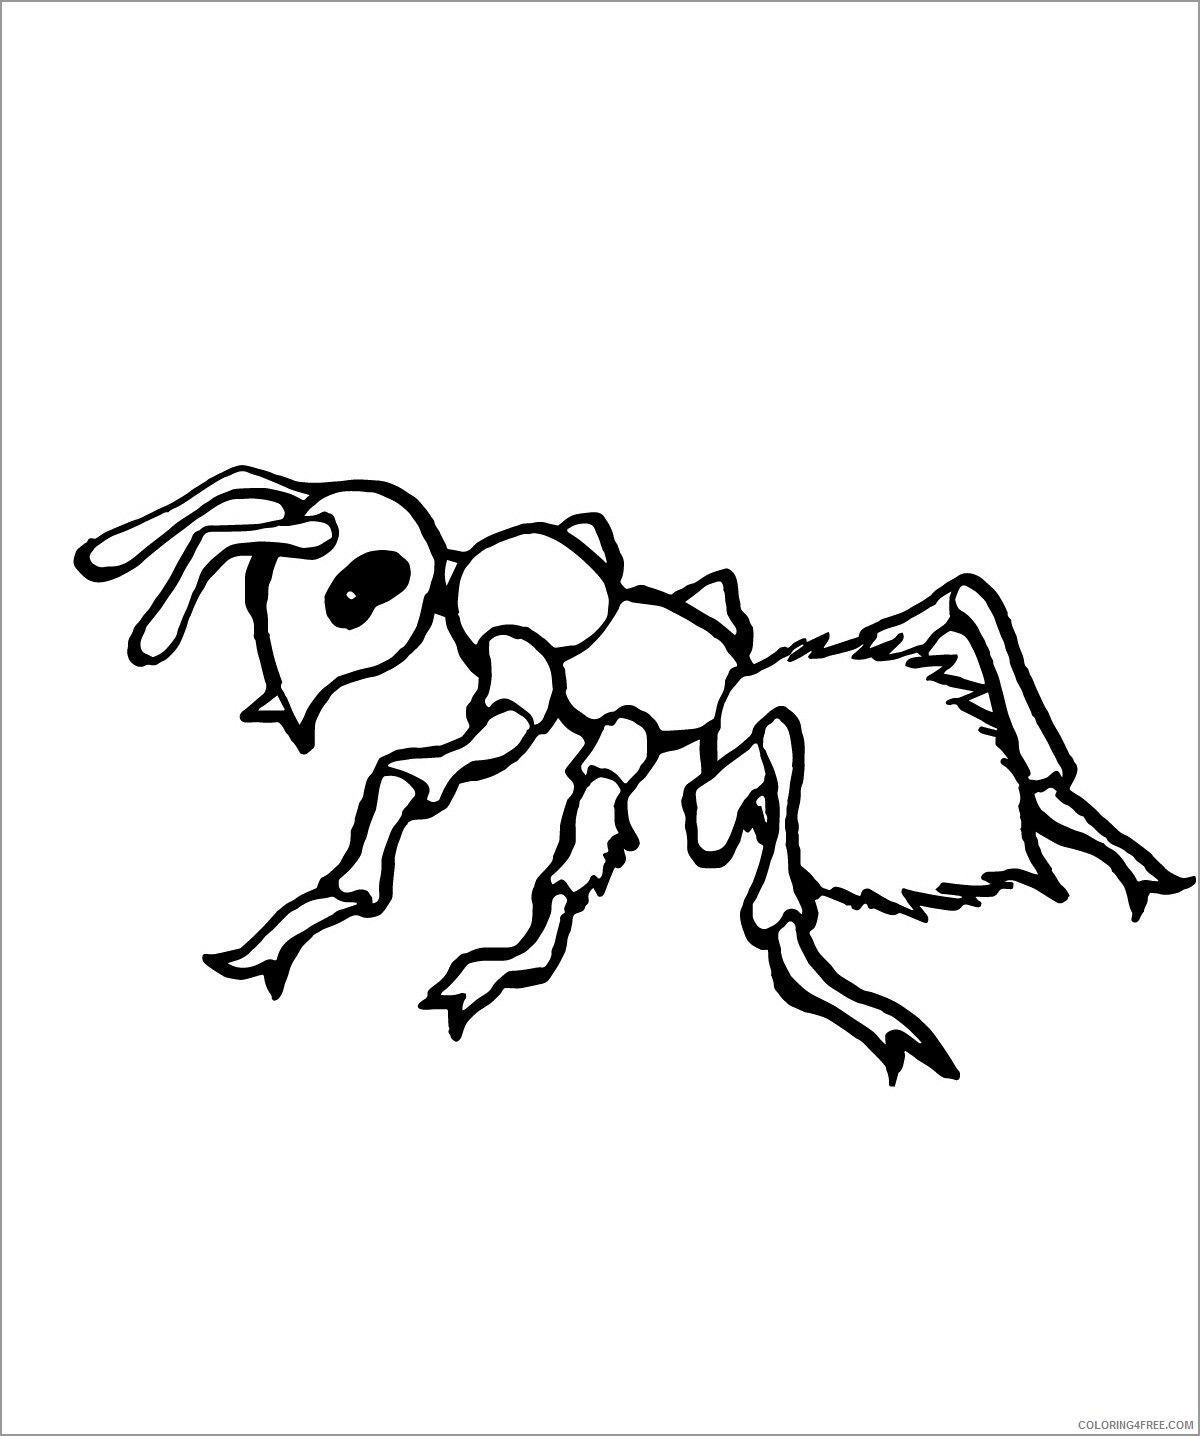 Preschool Animal Coloring Pages ant for preschoolers Printable 2021 4833 Coloring4free